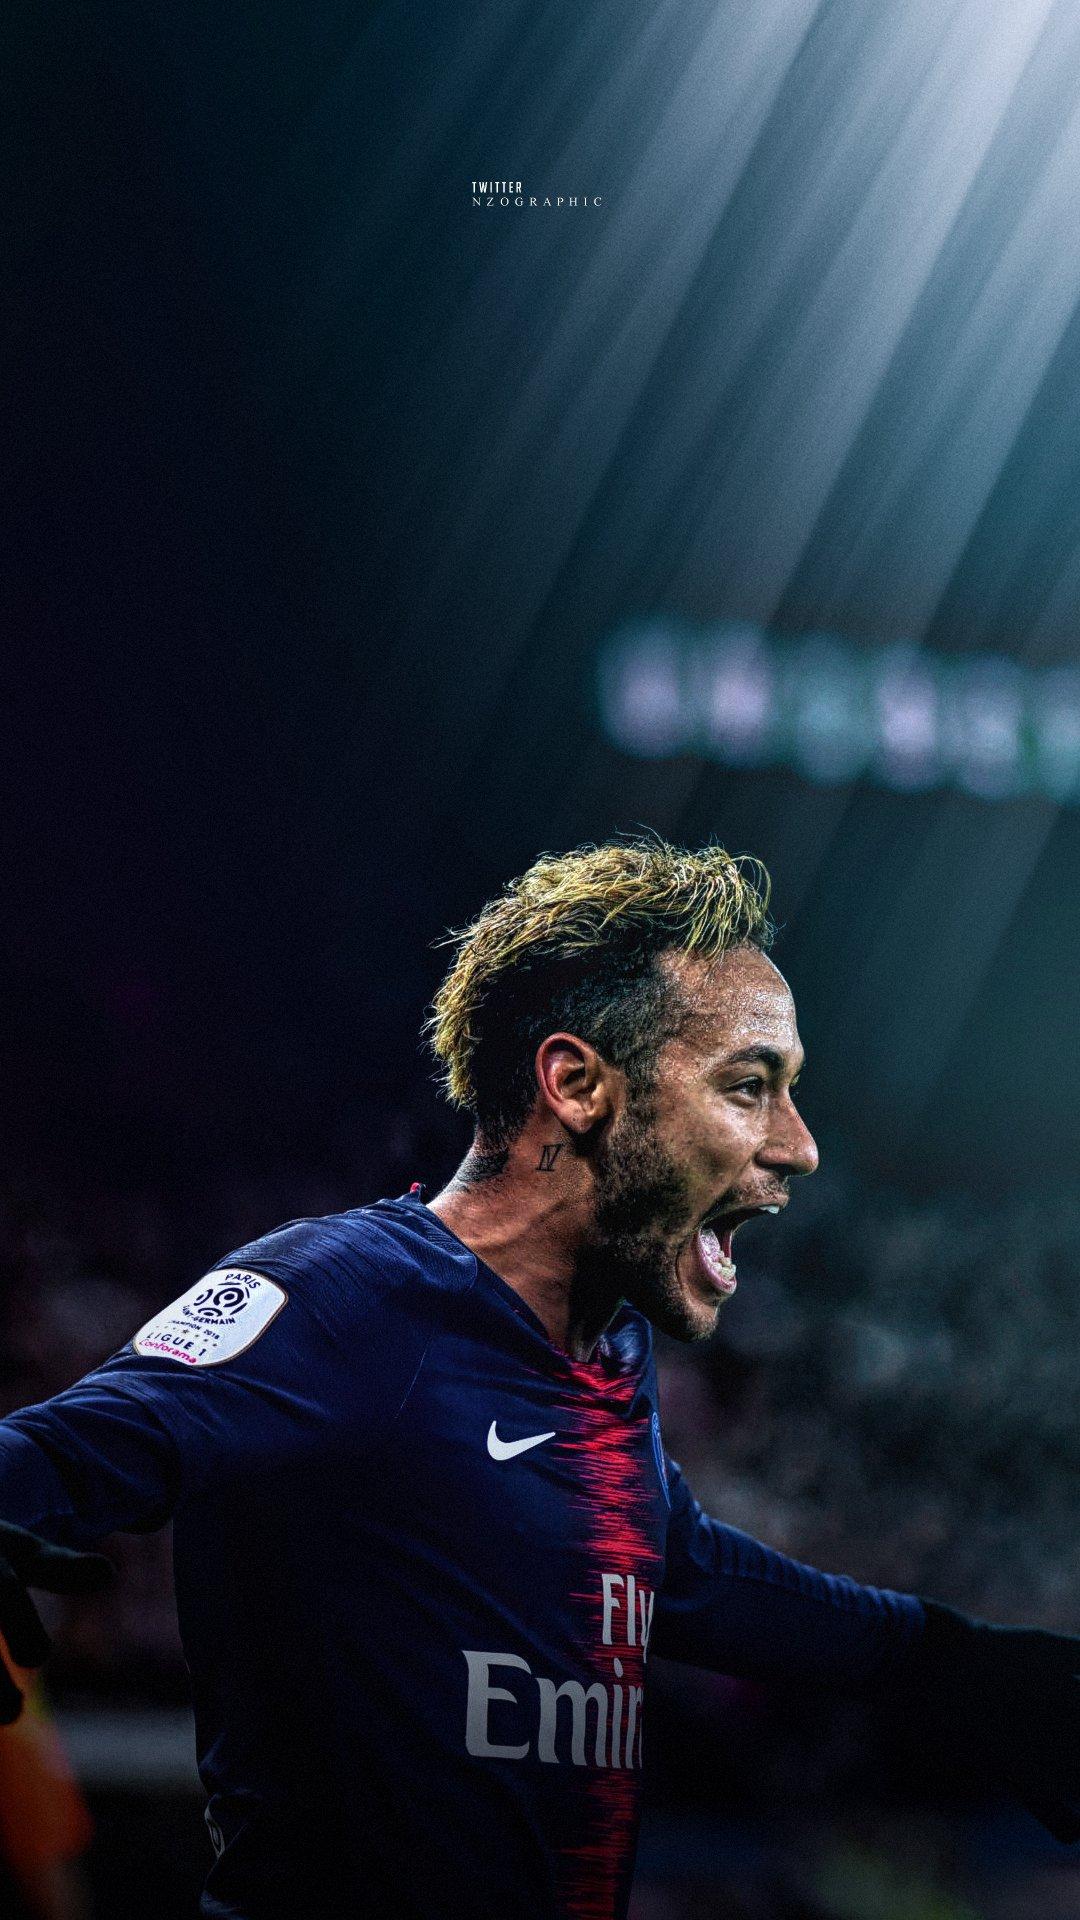 Wallpaper Neymar iPhone with high-resolution 1080x1920 pixel. You can use this wallpaper for your iPhone 5, 6, 7, 8, X, XS, XR backgrounds, Mobile Screensaver, or iPad Lock Screen - Neymar